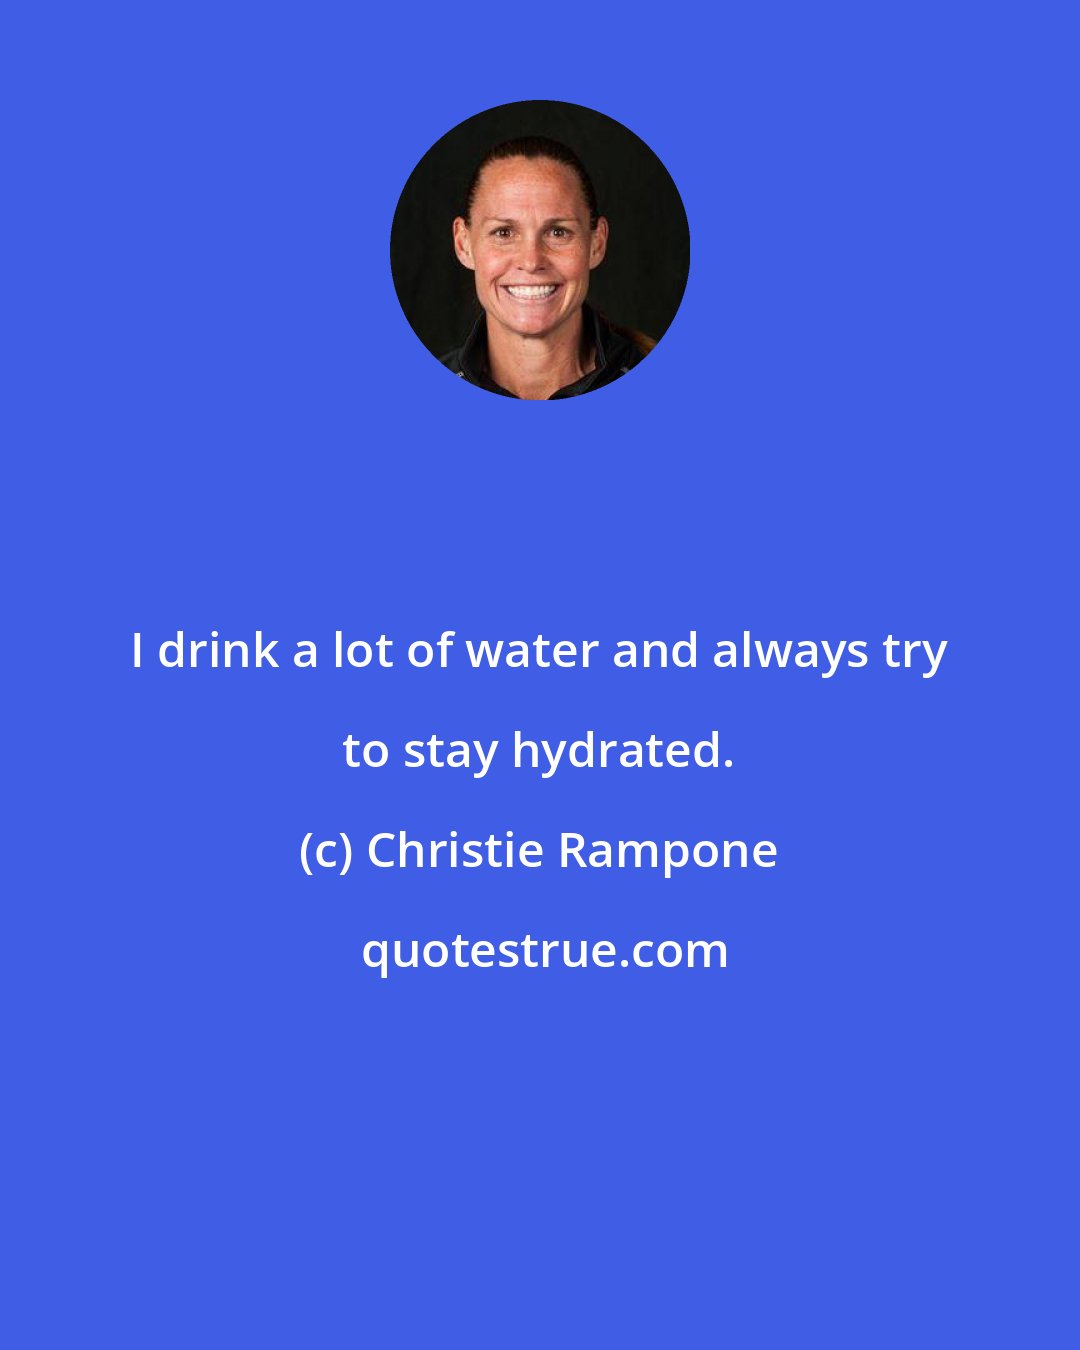 Christie Rampone: I drink a lot of water and always try to stay hydrated.